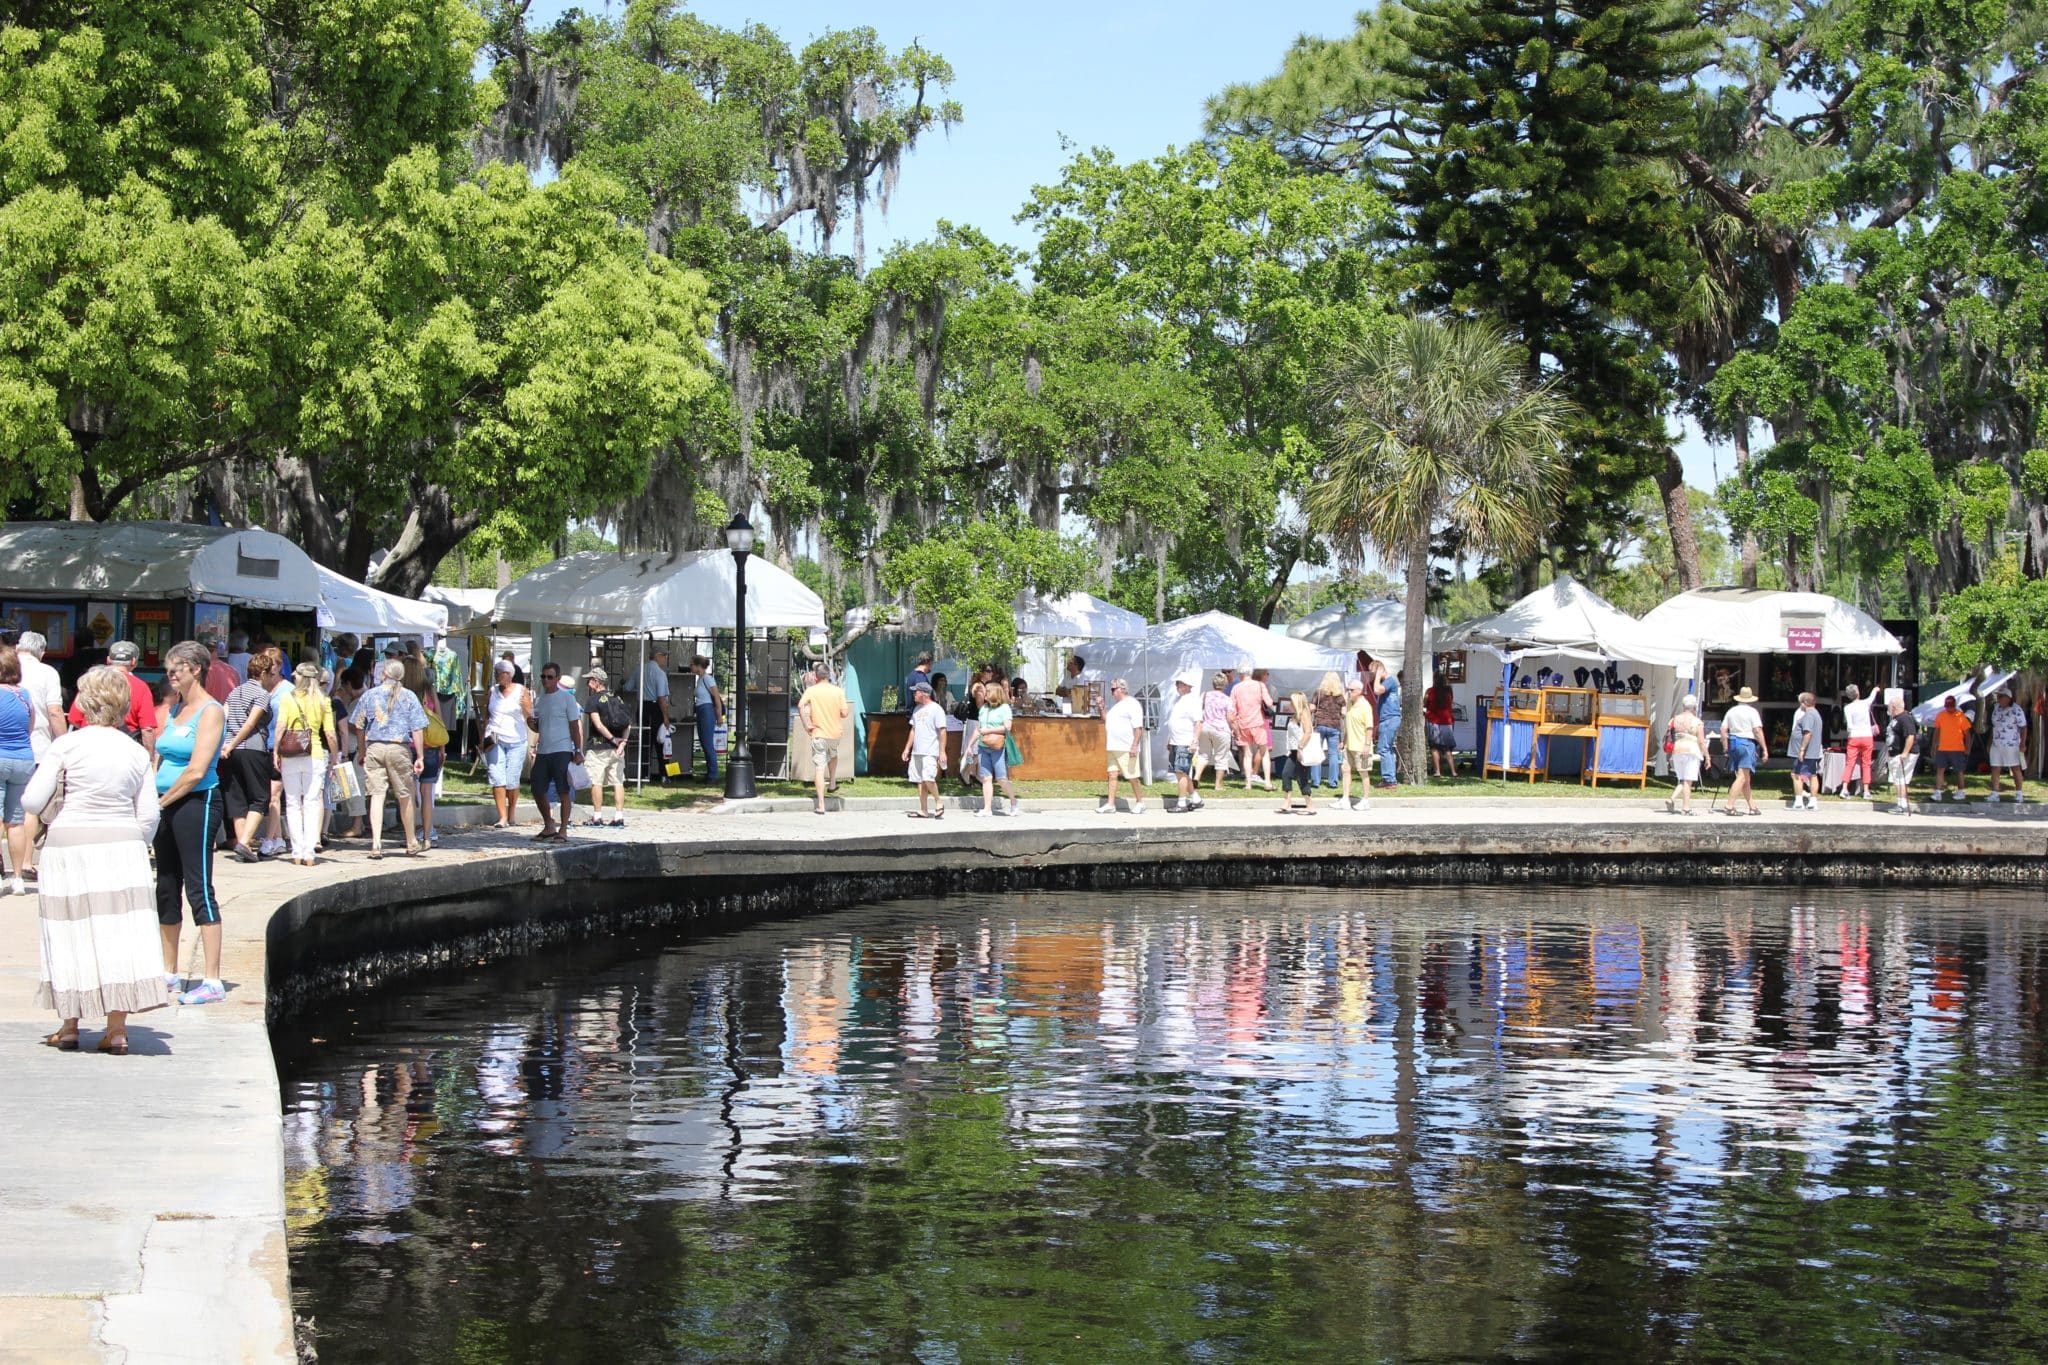 a crowd shot of people and tents at the Fine Arts Festival in Craig Park